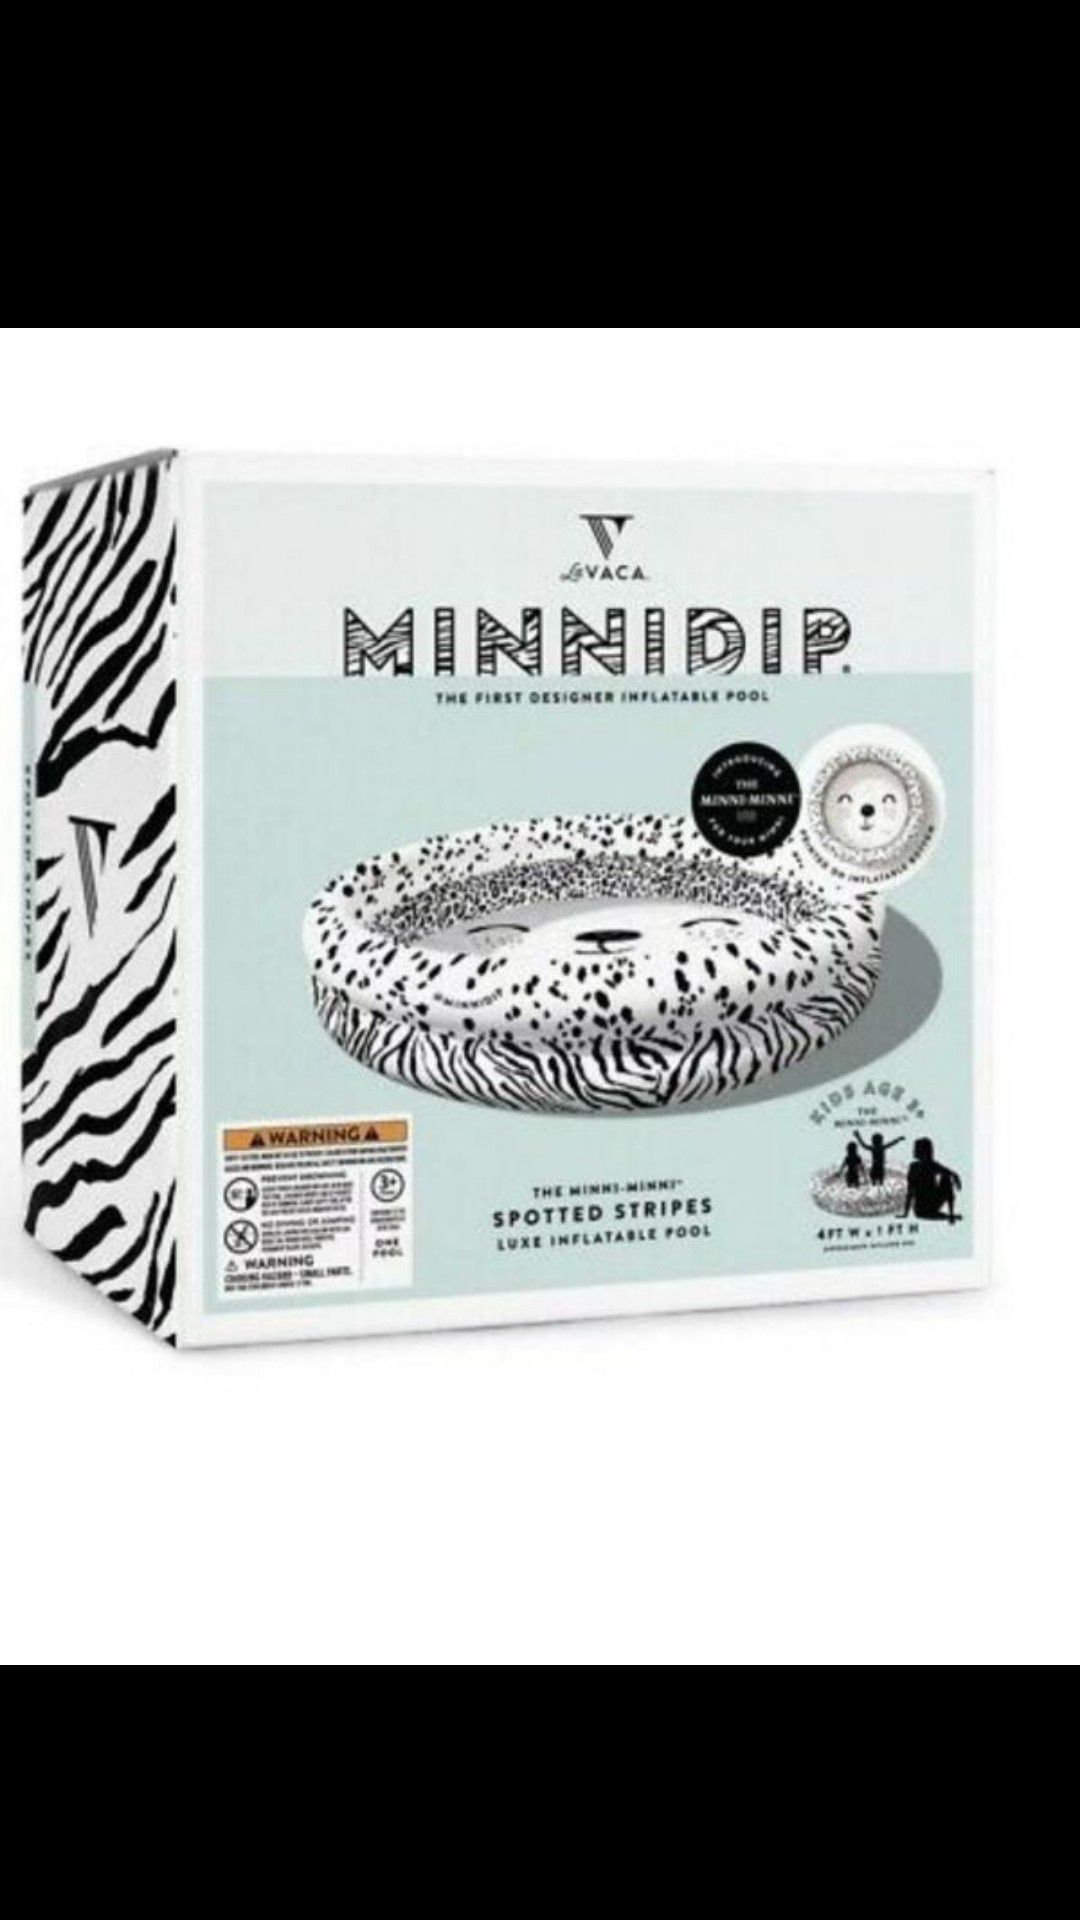 Minnidip Spotted striped luxe designer inflatable pool